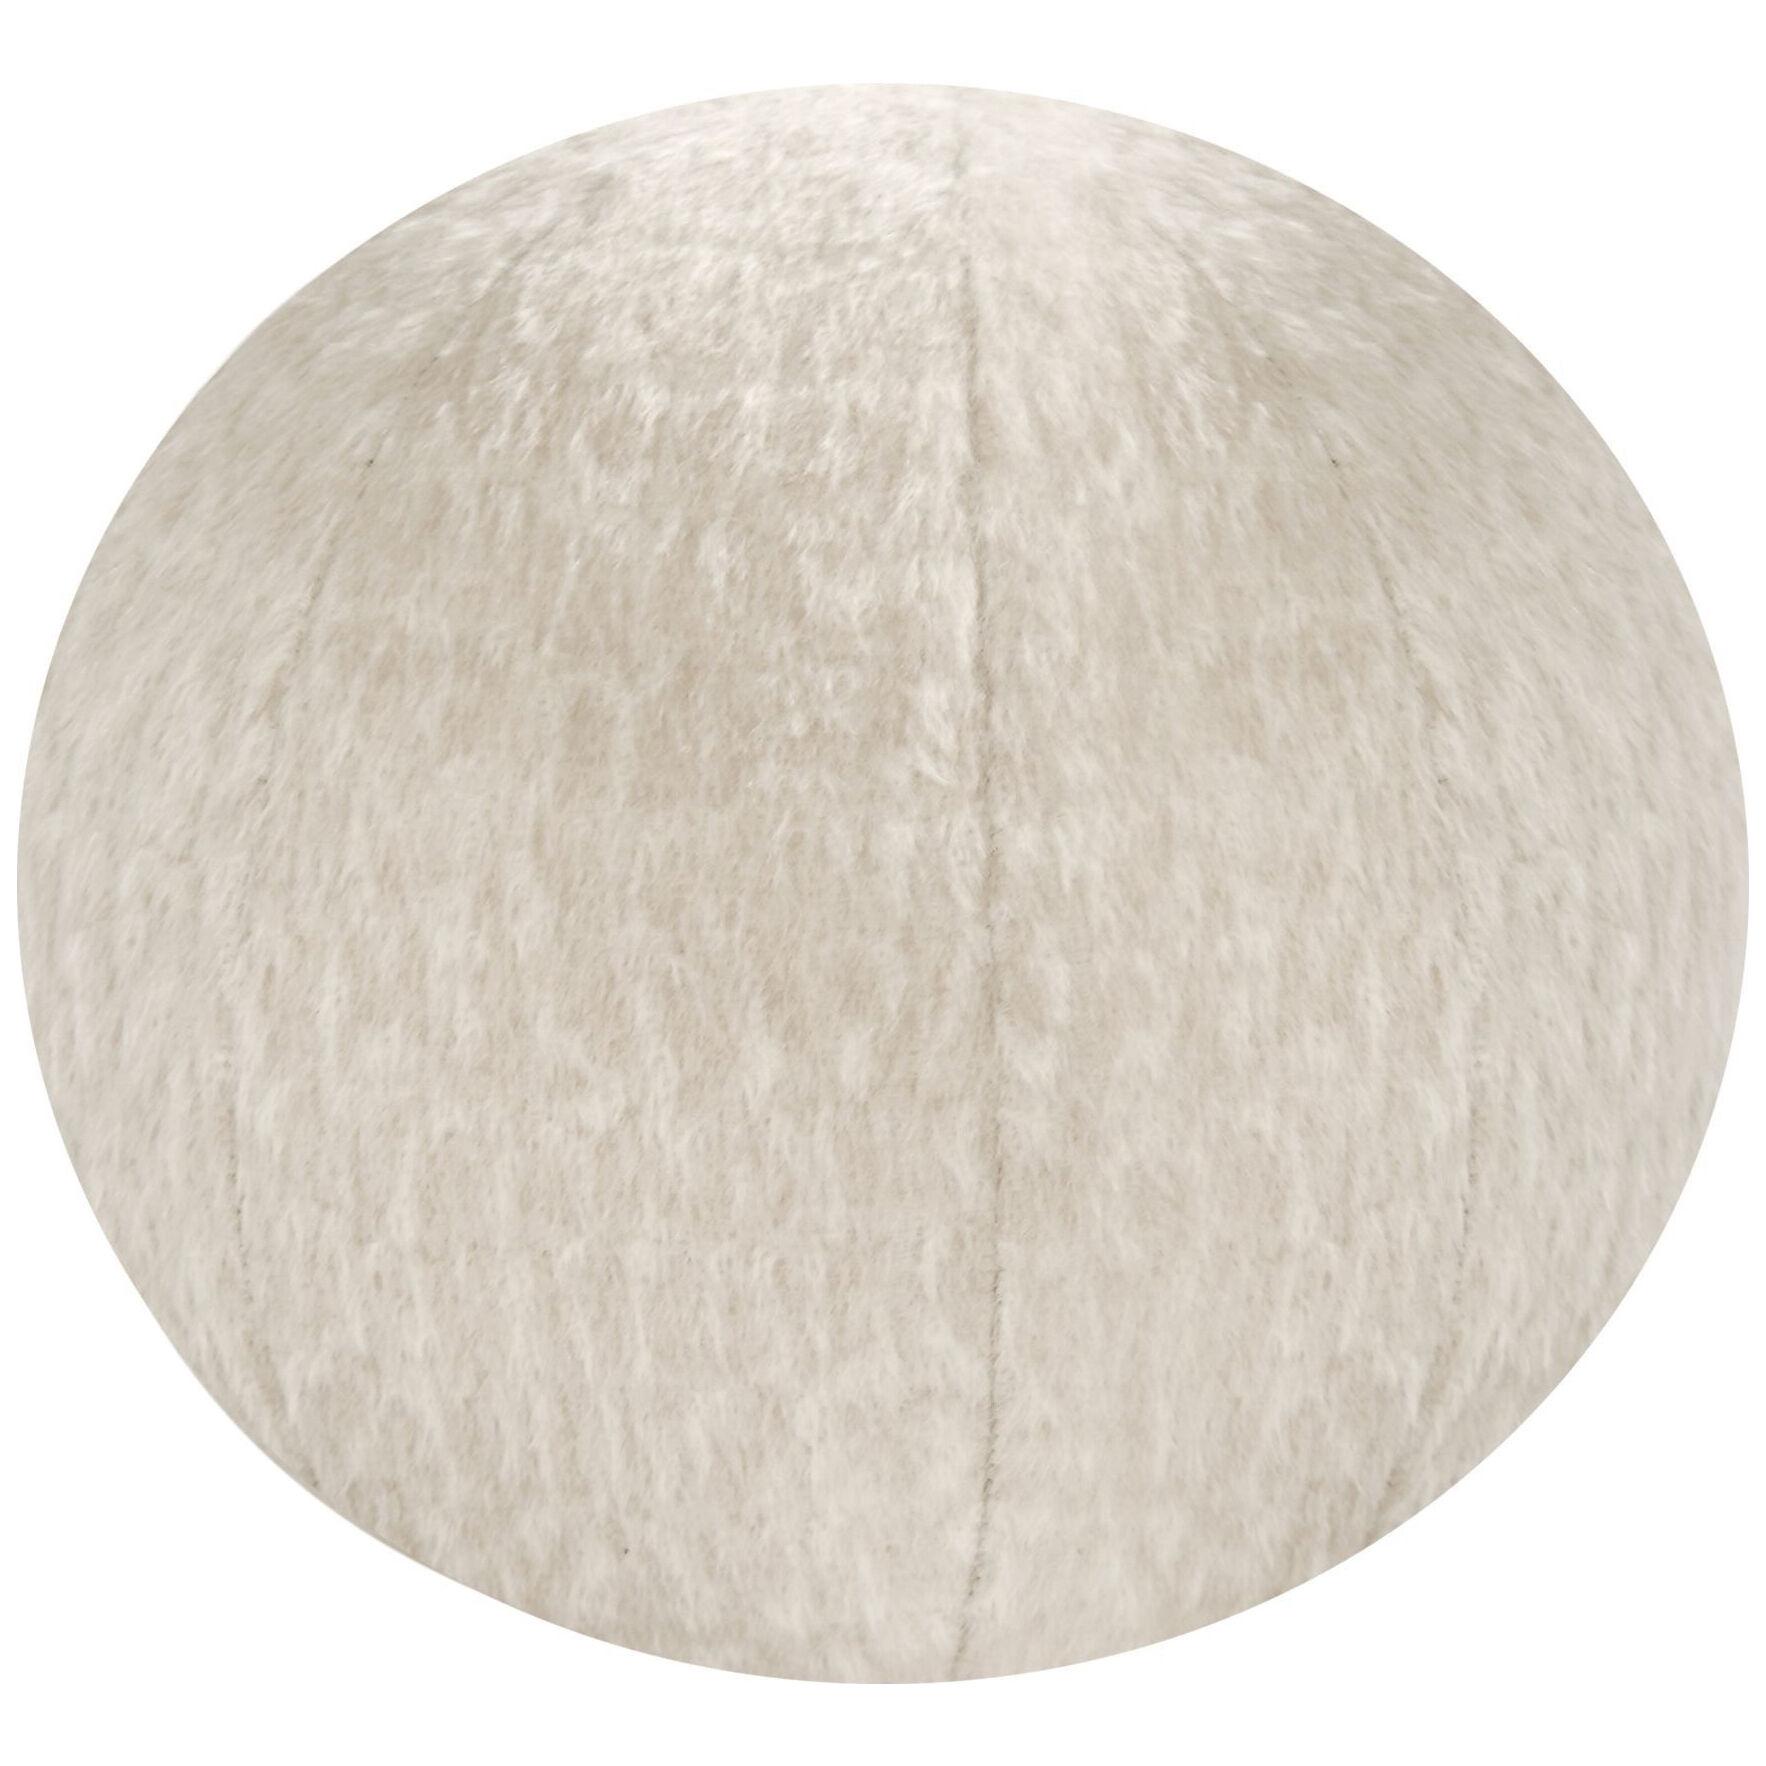 Orb Accent Pillow in Beige Alpaca by Holly Hunt